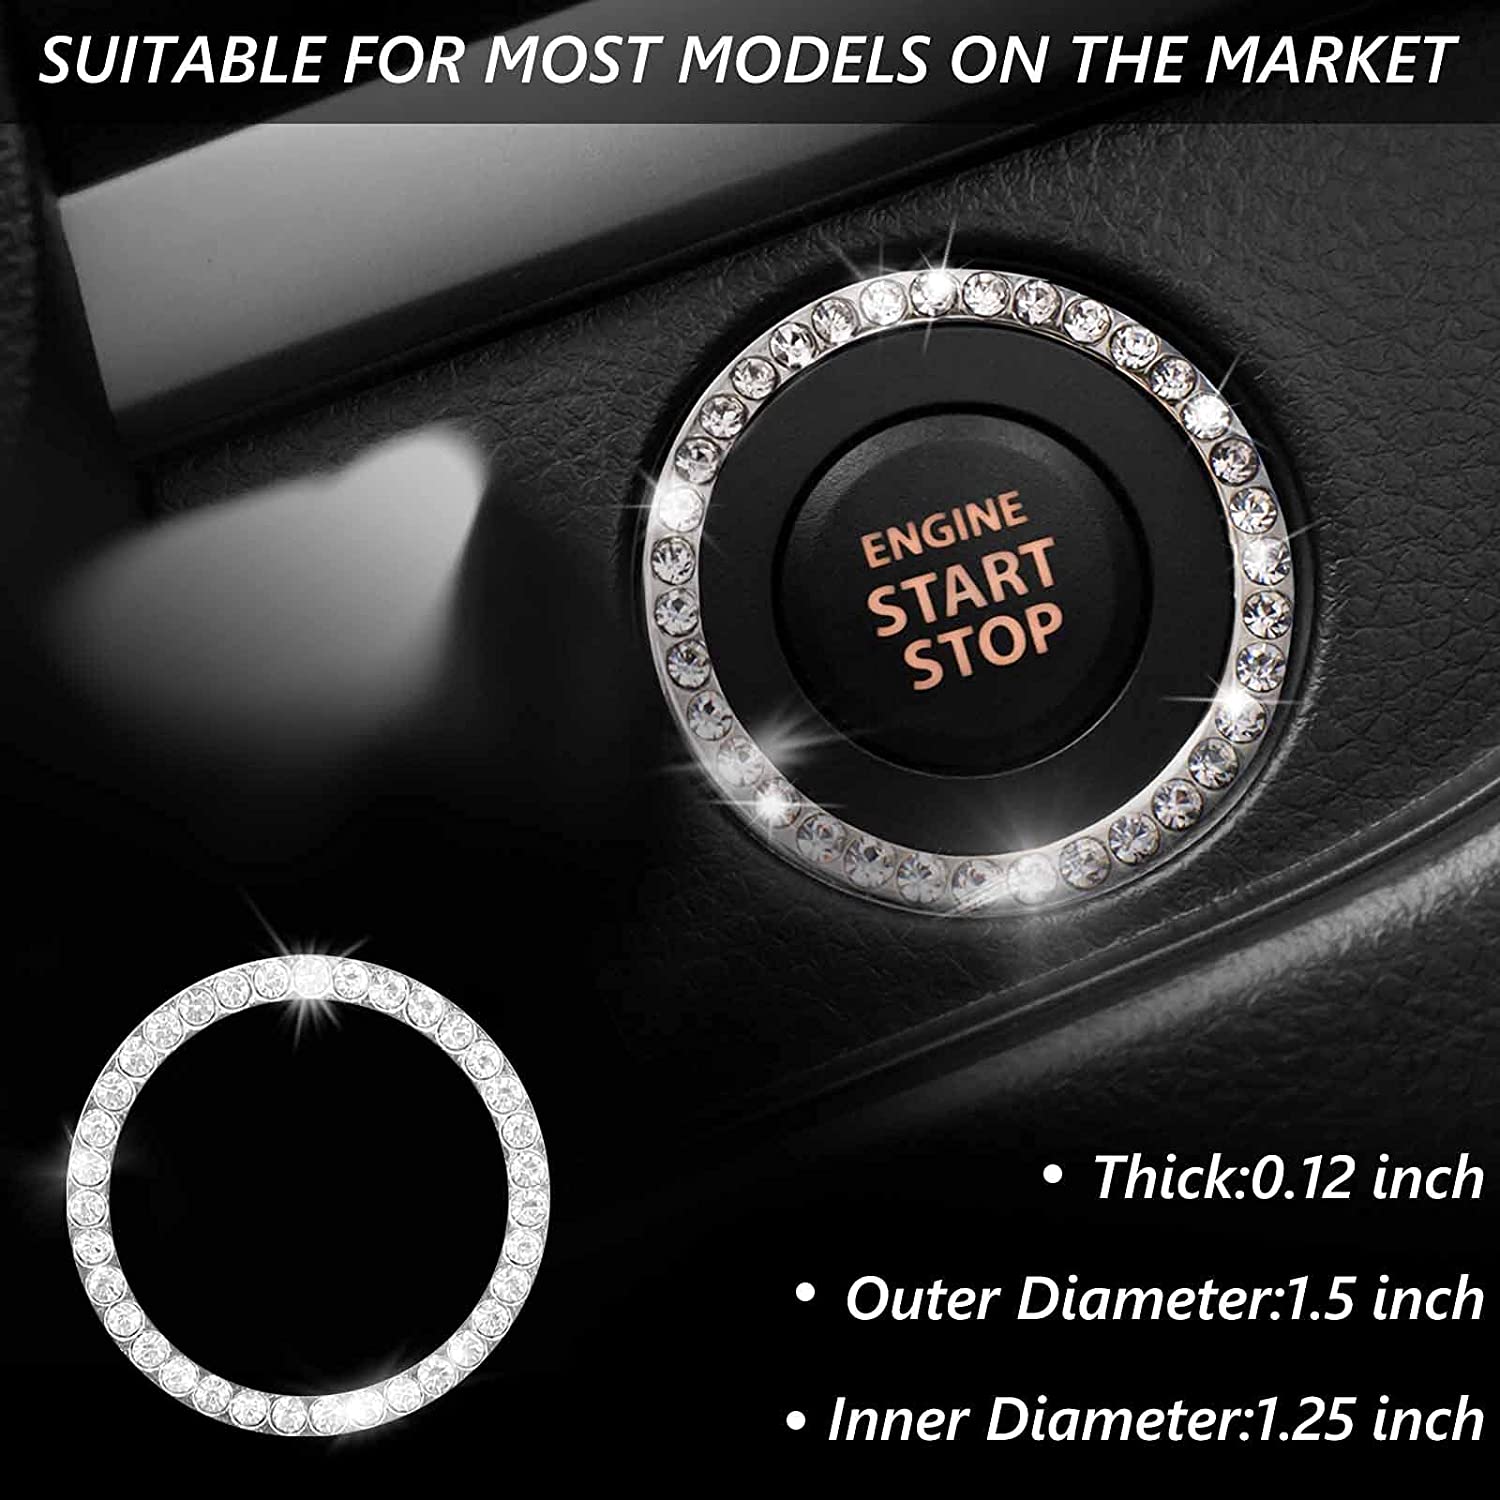 Bling Steering Wheel Accessories Compatible with Acura Accessories Bling MDX RDX TLX TL CDX ZDX Interior Decoration Women 3D Rhinestone Decals Cover ,with 2 Anti Slip Silicone Car Coasters - Delicate Leather